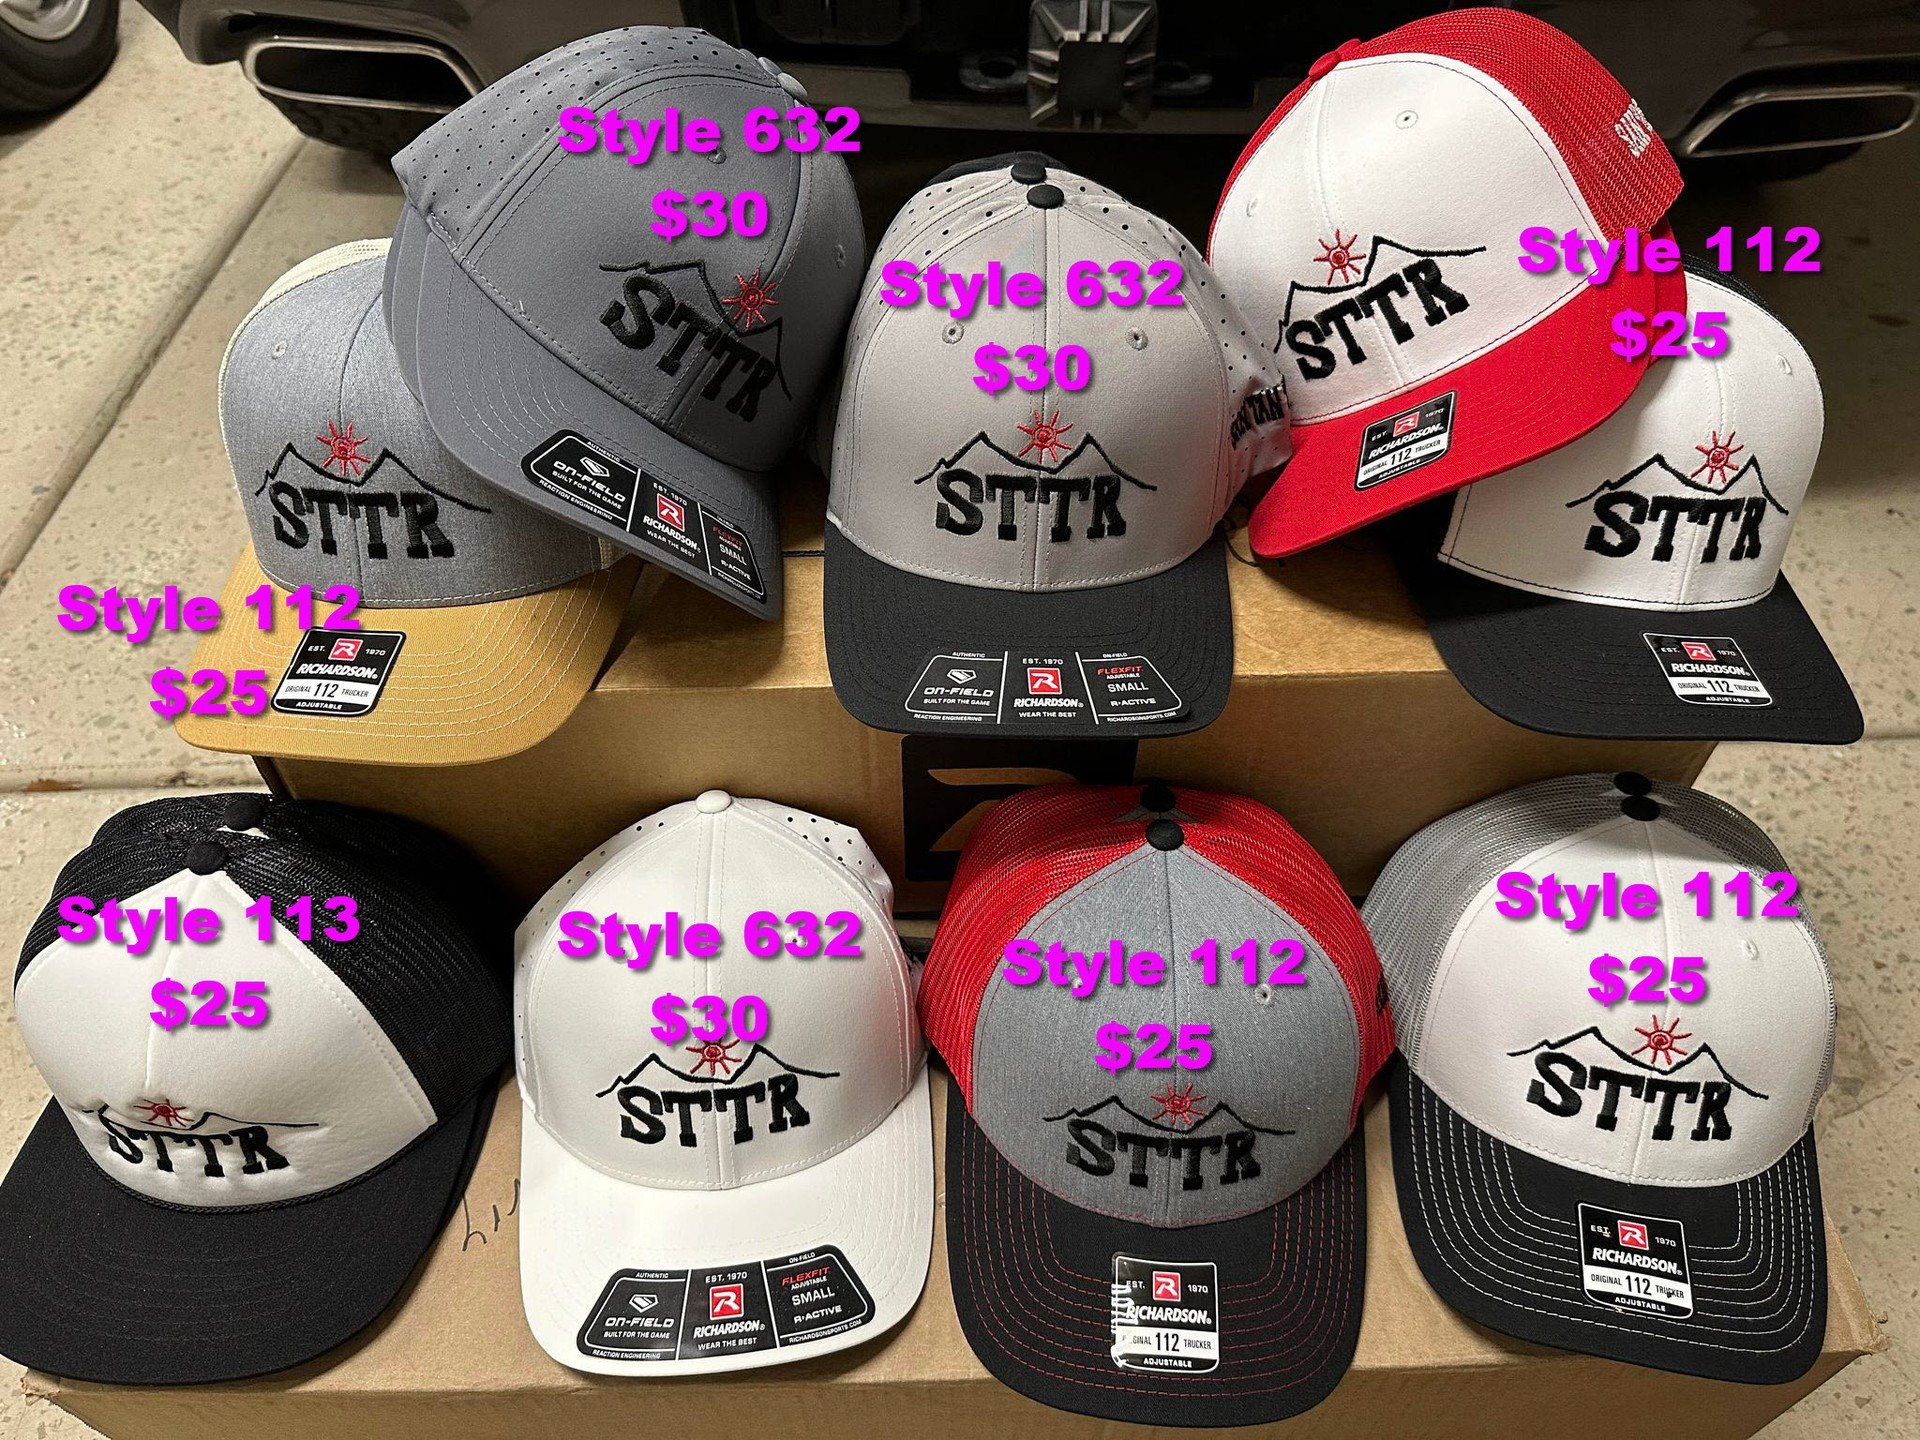 Thirsty Thursday and STTR gear!!! Who looking for a STTR hat? New hat selections will be on sale at the group runs, limited quantity available.

Normal 5pm meet up at the Goldmine TH for our heat training group run on the mountain. Then, we'll share 